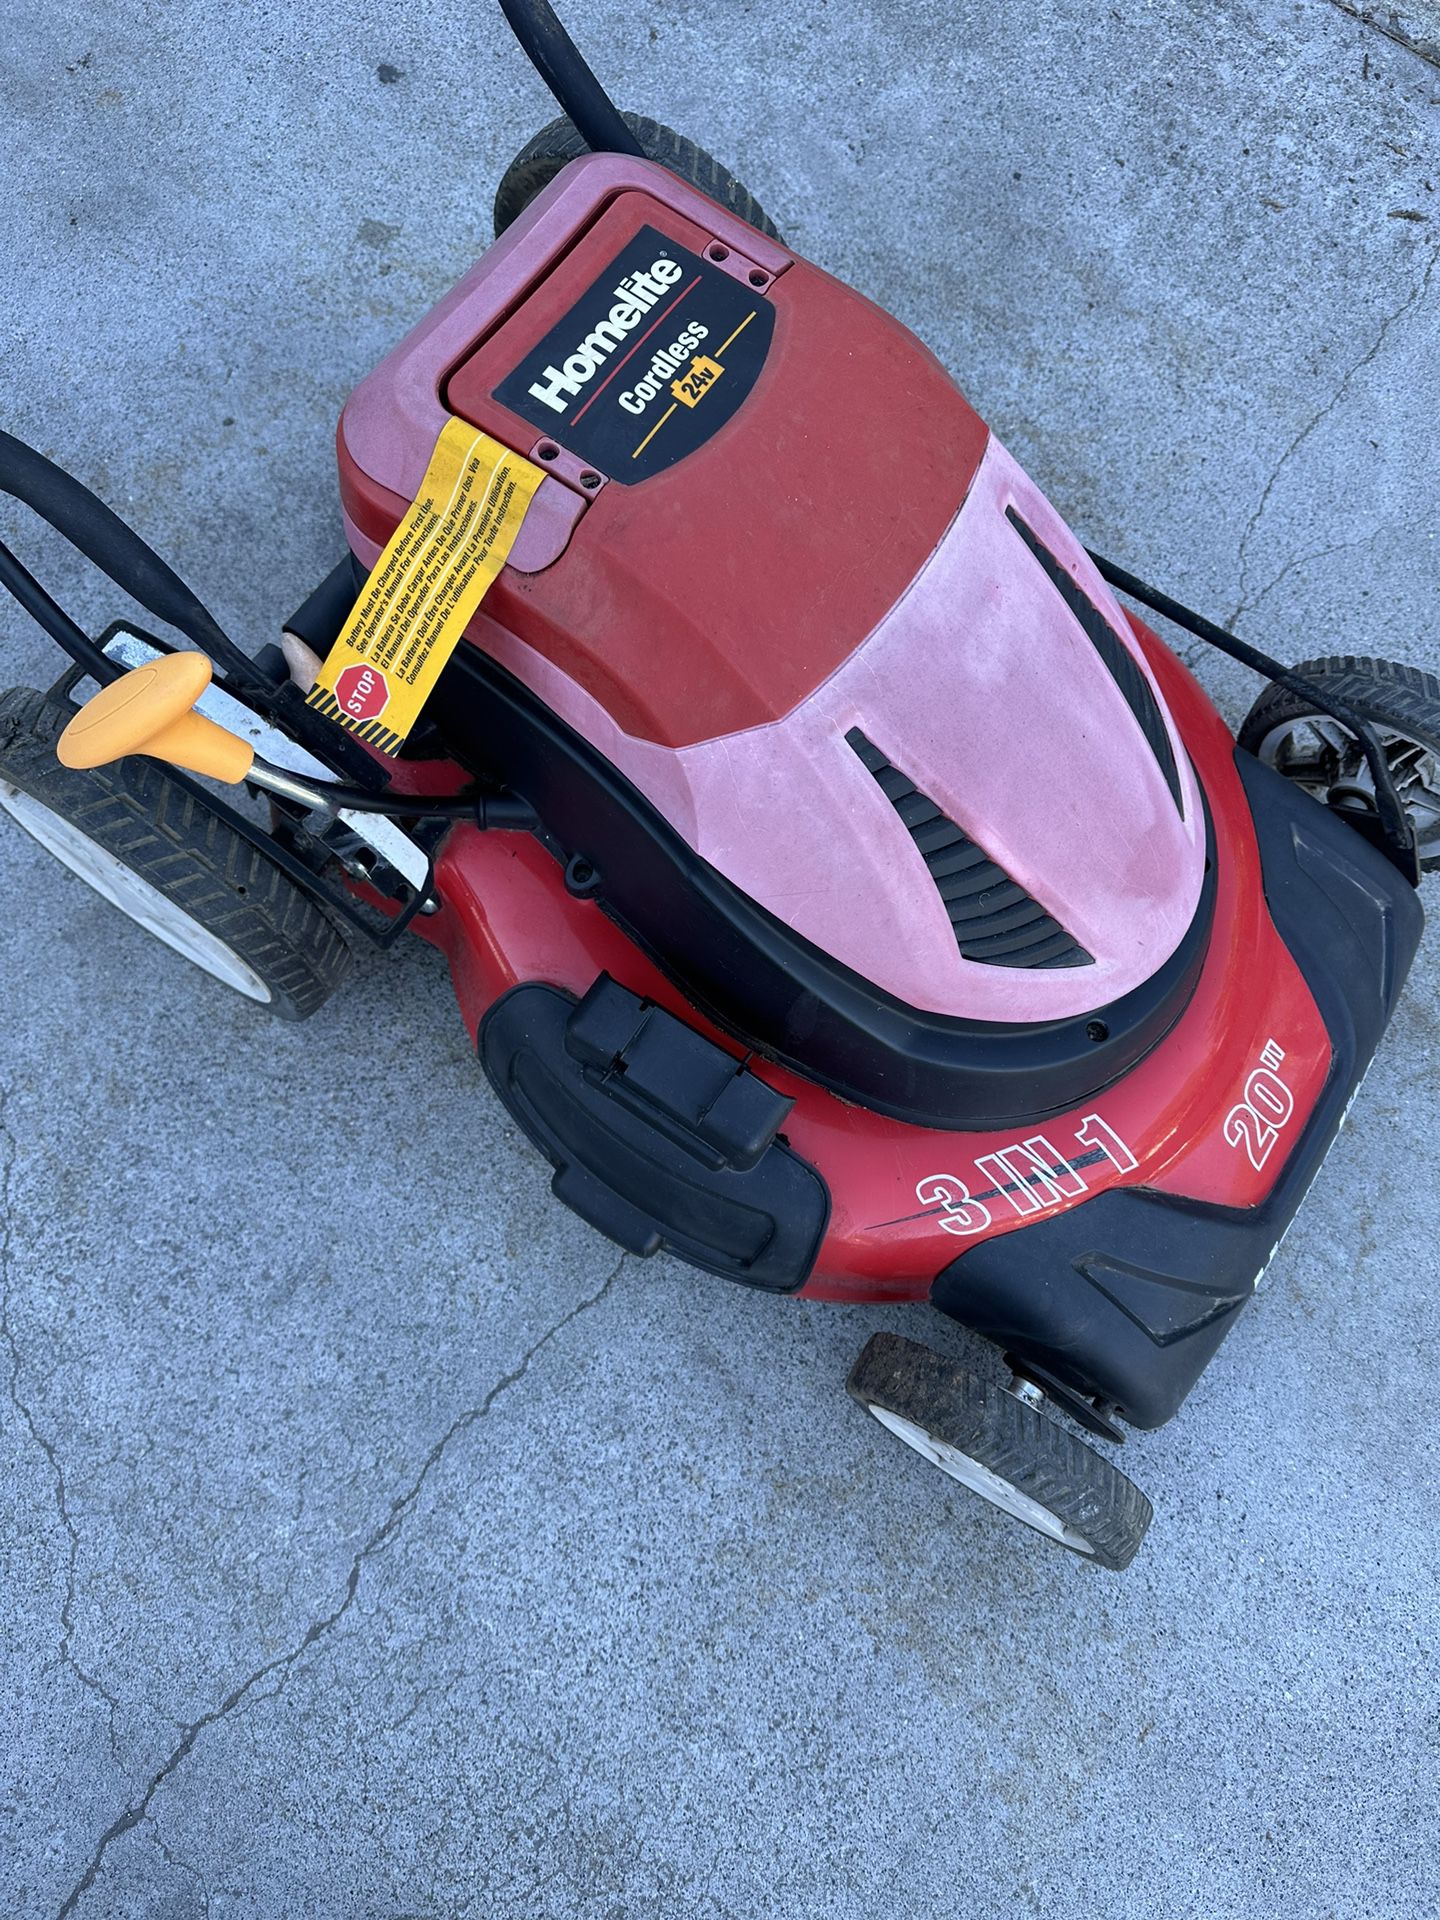 FREE Homelite Battery operated Lawn Mower 